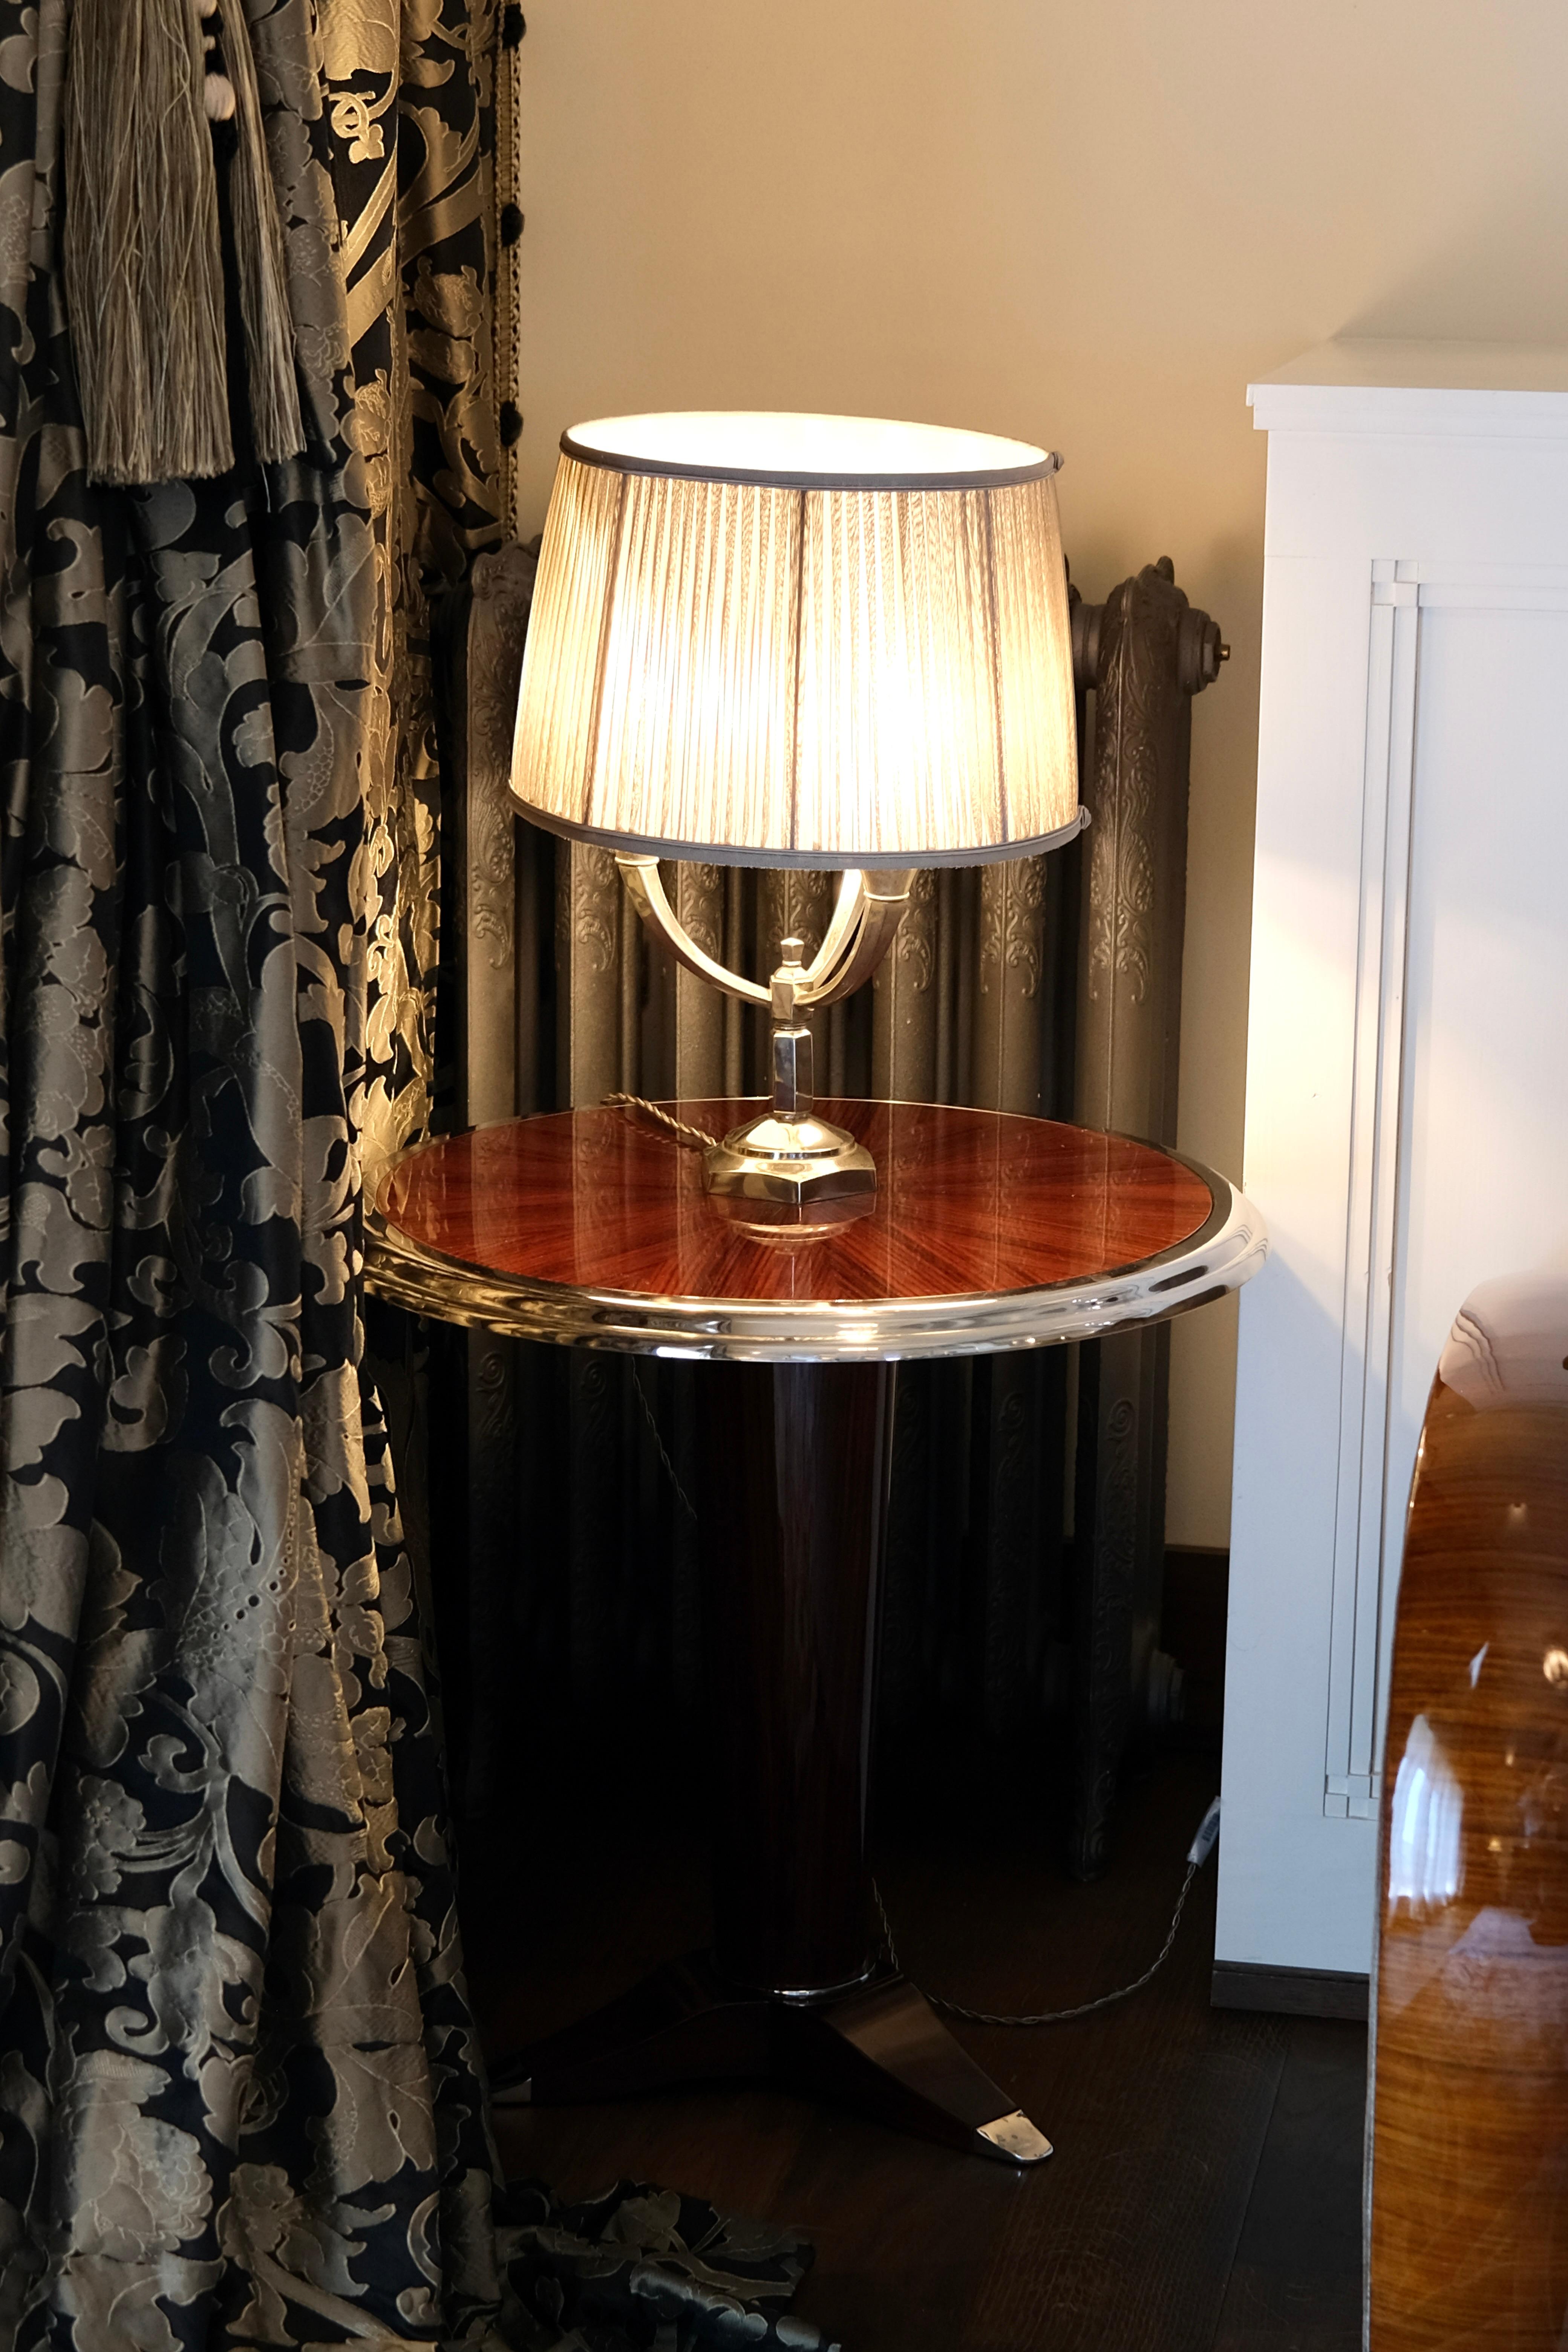 Side table / coffee table
Mahogany, high gloss lacquered
metal sabots and edge, chrome plated

Made in the Style of Art Deco, France, 1990s 

Also available as a pair

Dimensions:
Diameter: 60 cm
Height: 59 cm. 